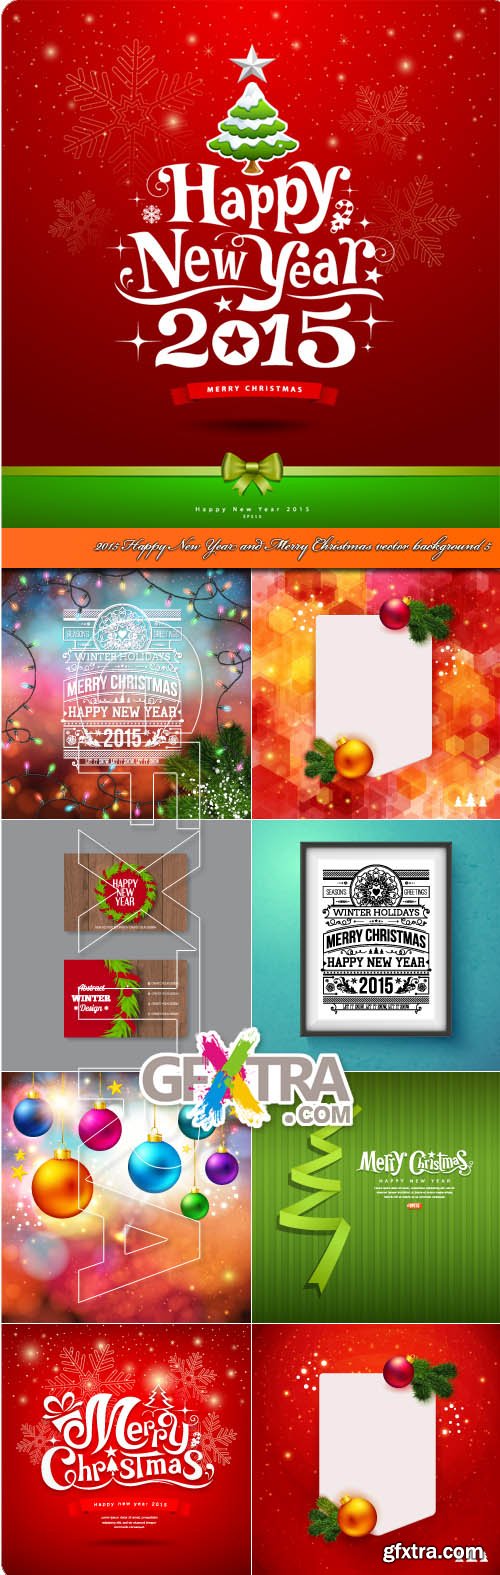 2015 Happy New Year and Merry Christmas vector background 5